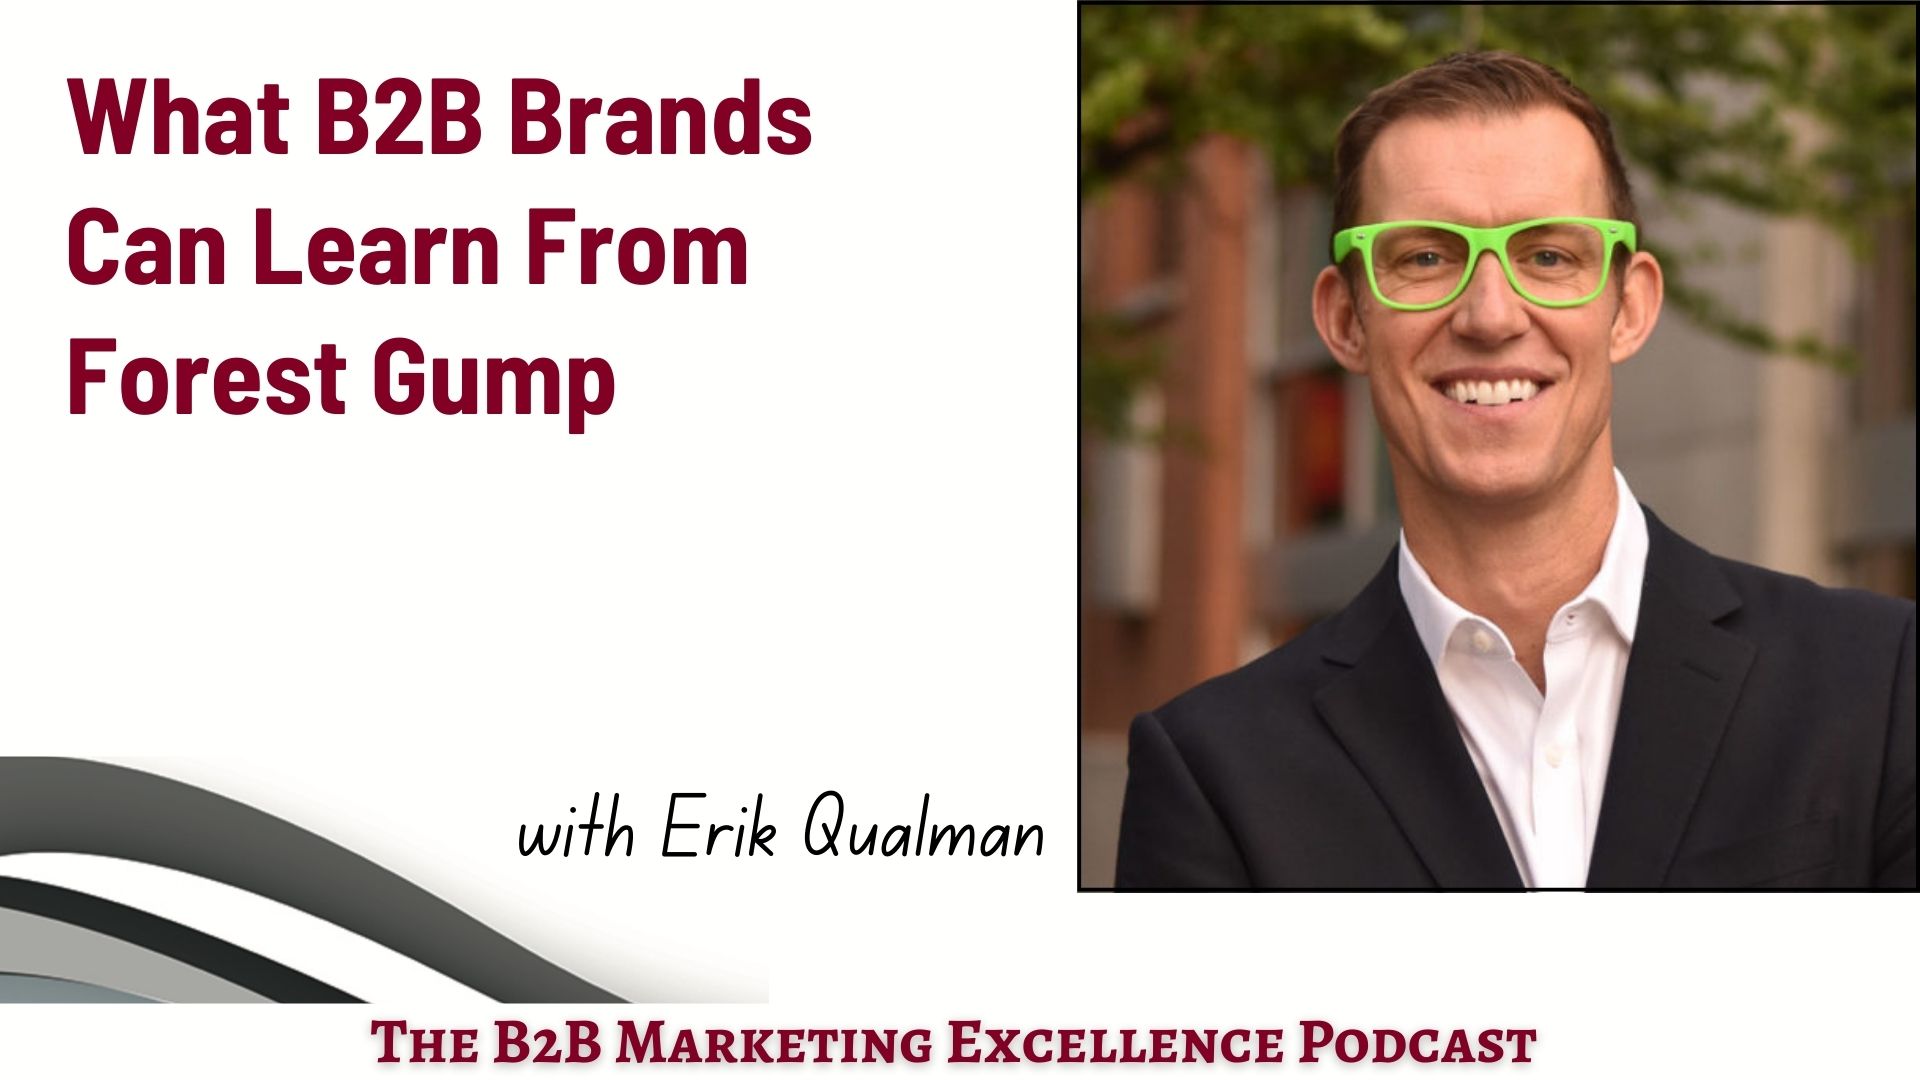 Podcast – What B2B Brands Can Learn From Forest Gump